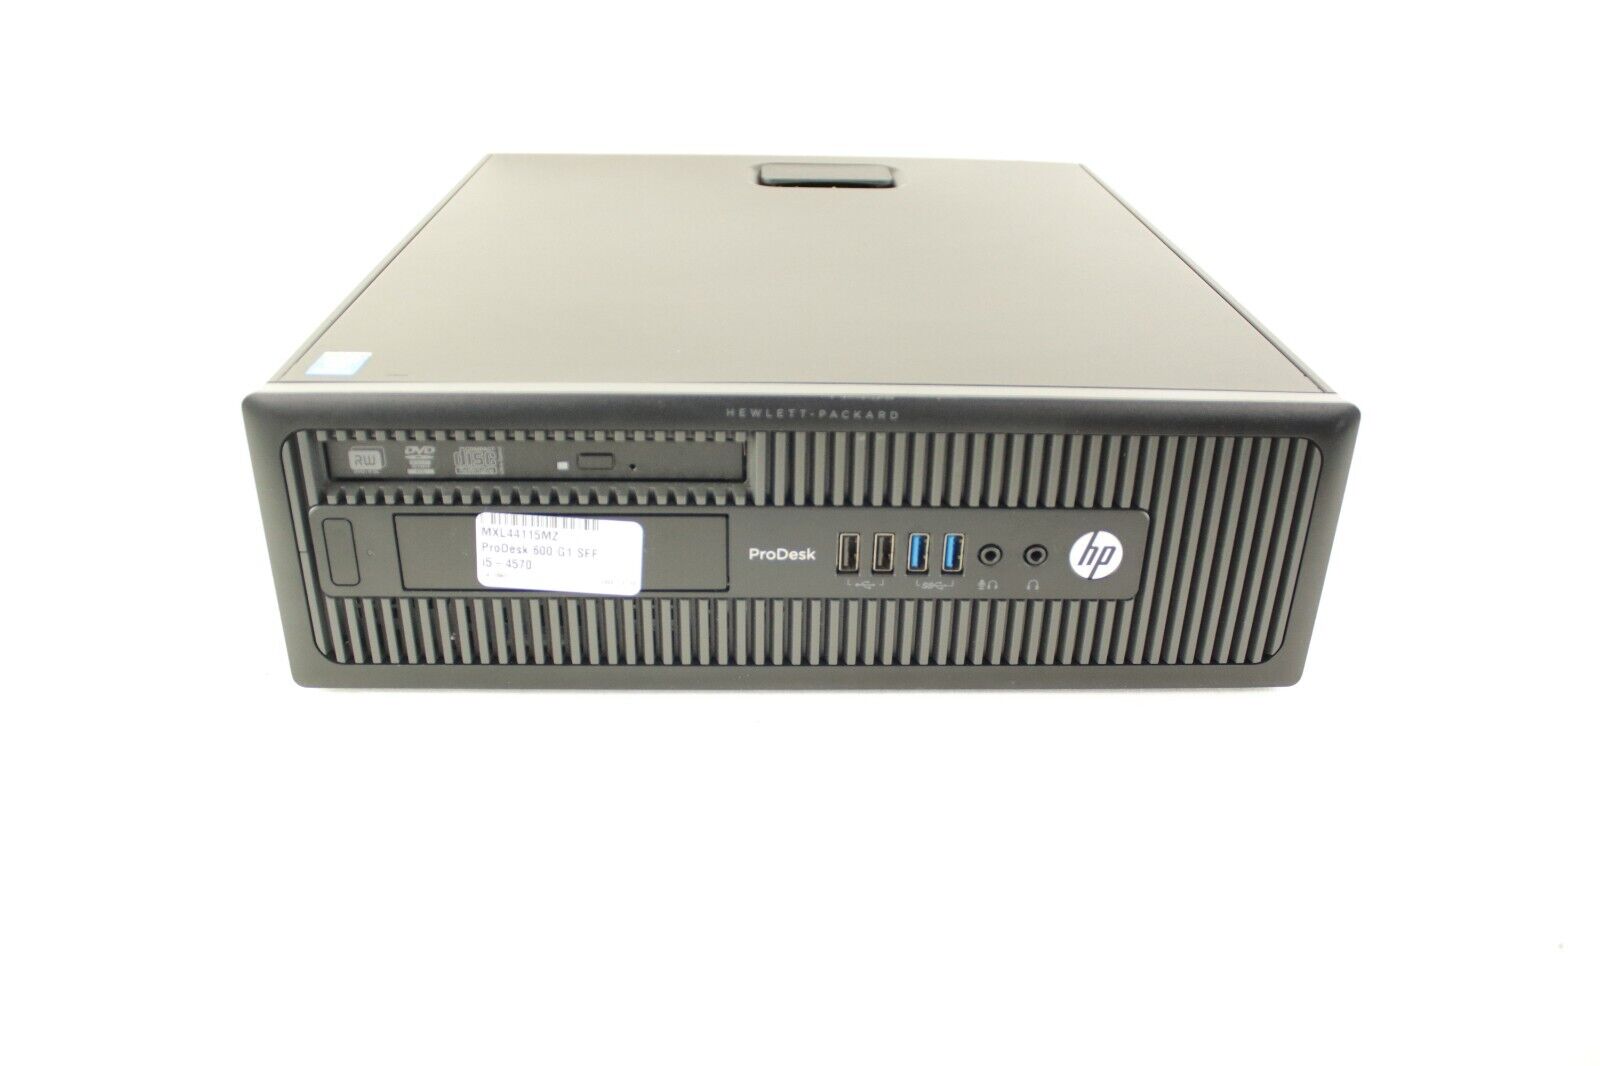 HP ProDesk 600 G1 SFF w/ Core i5-4570 CPU @3.2GHz - 4GB RAM - No HDD/SSD or OS